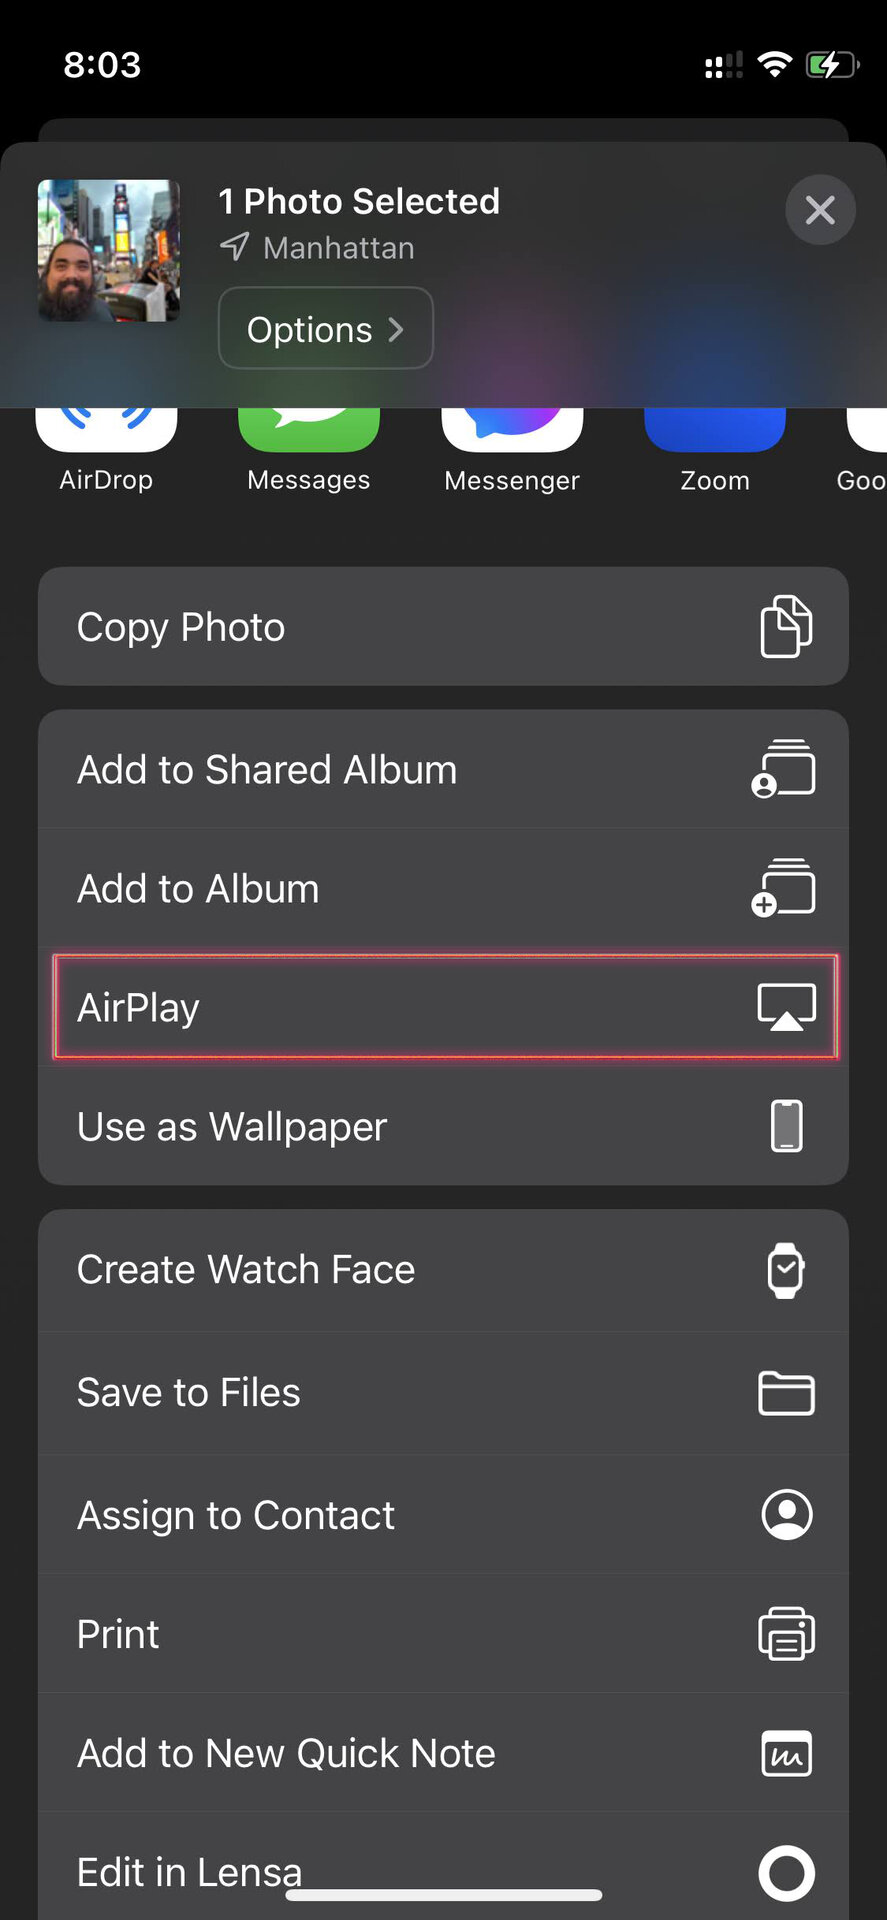 Using AirPlay Samsung TV in Photos app 2